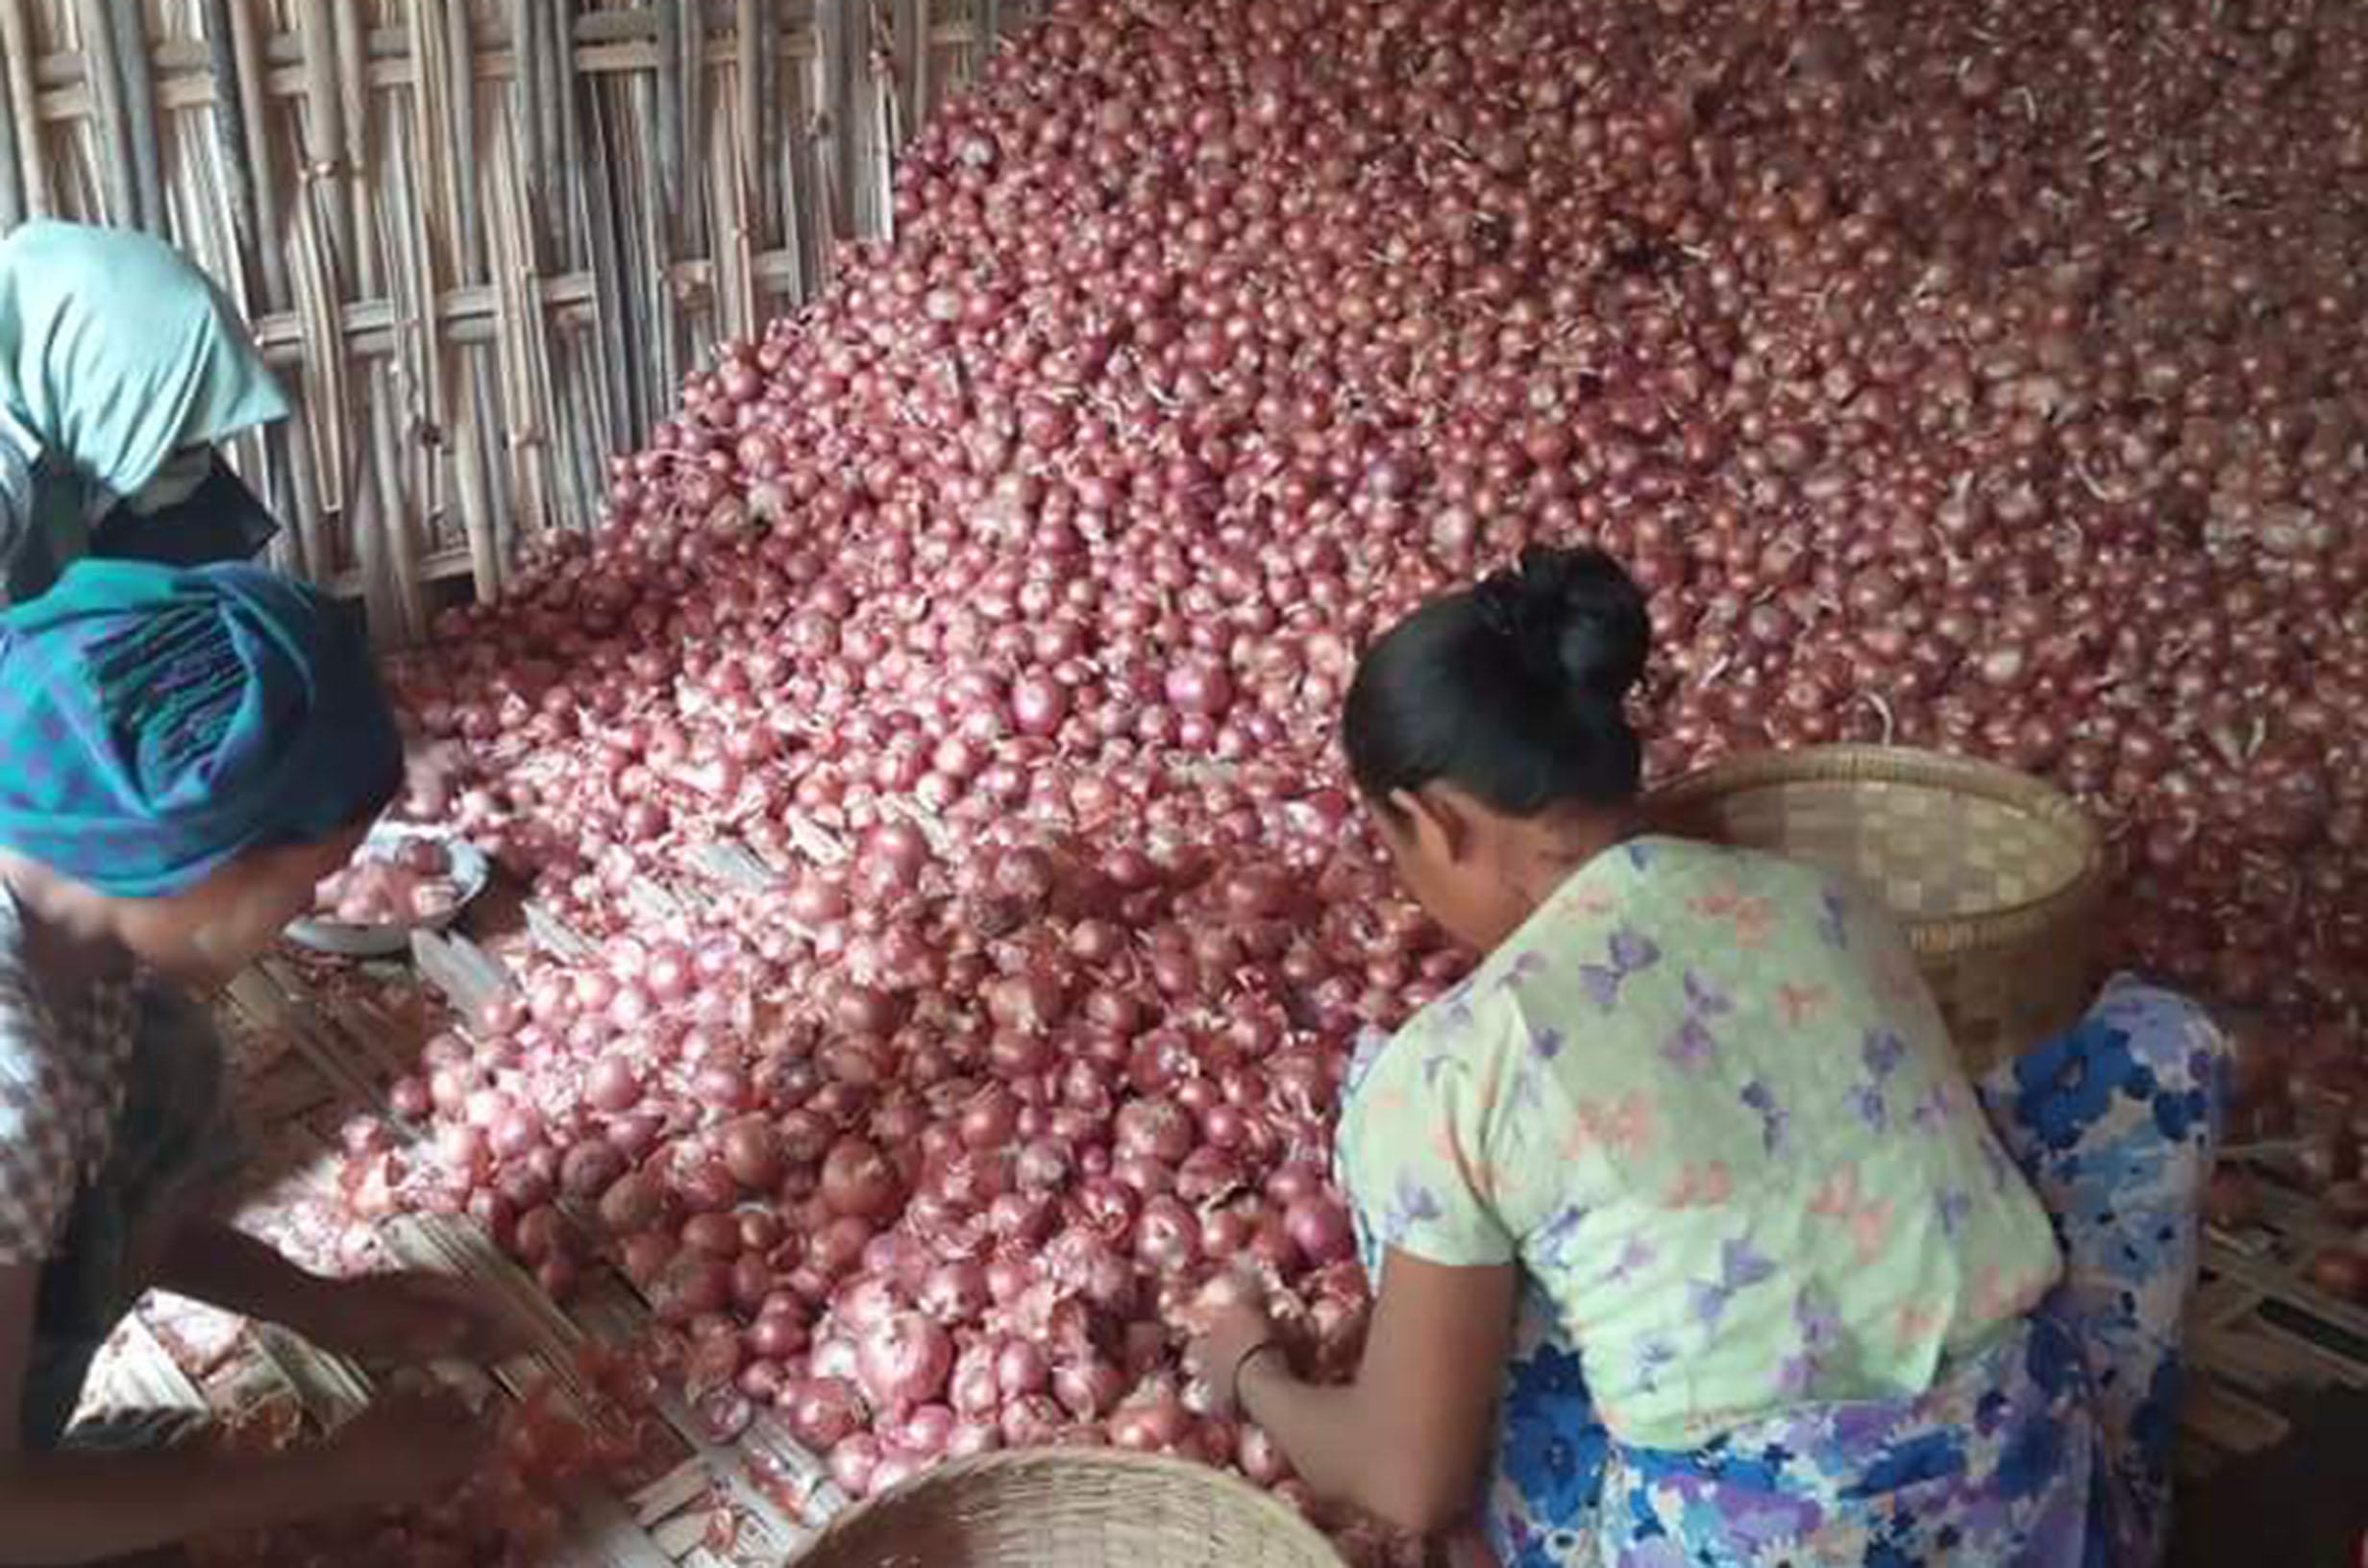 Local onion growers are facing the difficulties with their onion cultivation businesses due to the significant decline of foreign demand during the outbreak 